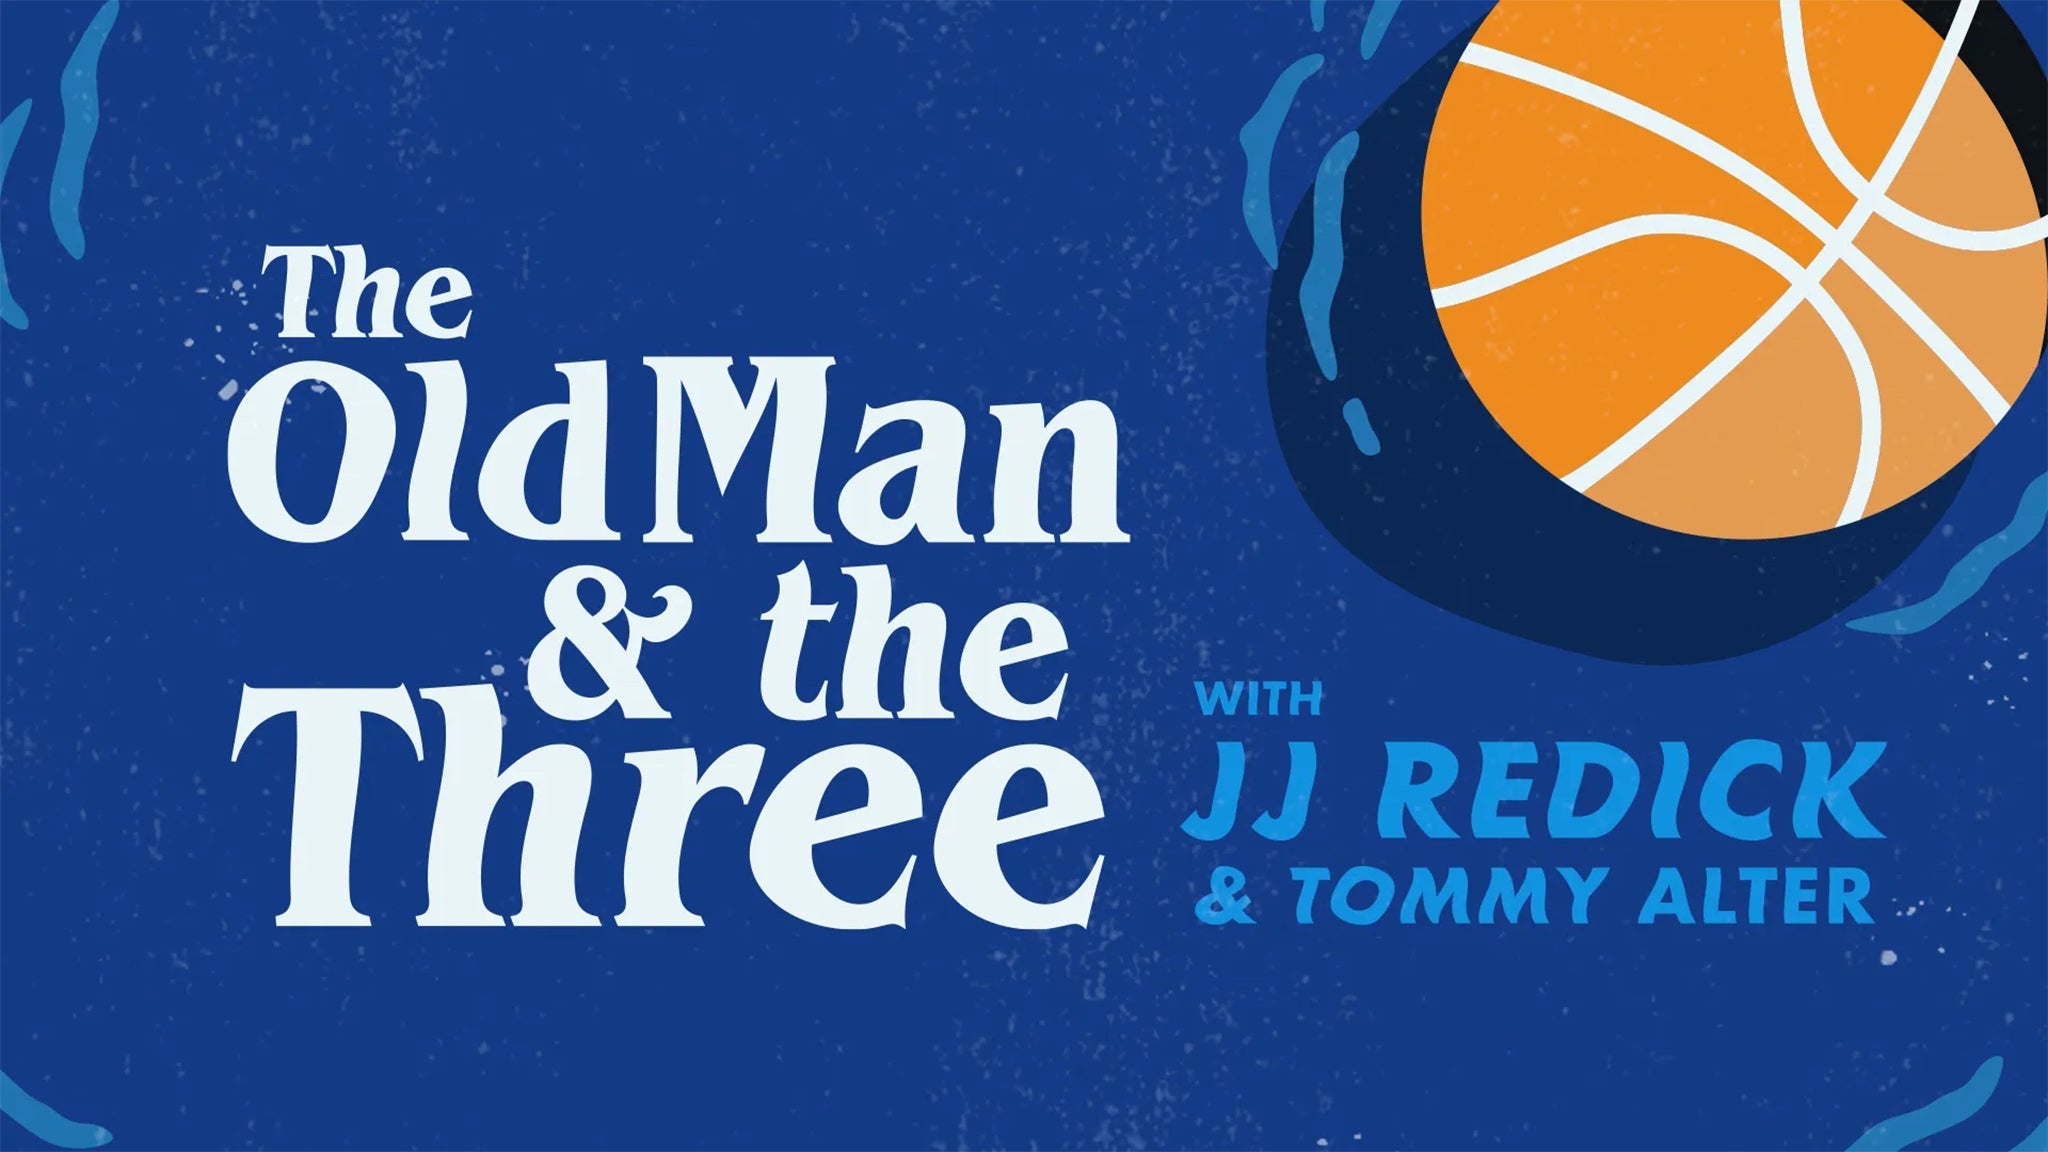 The Old Man and The Three Live! presale password